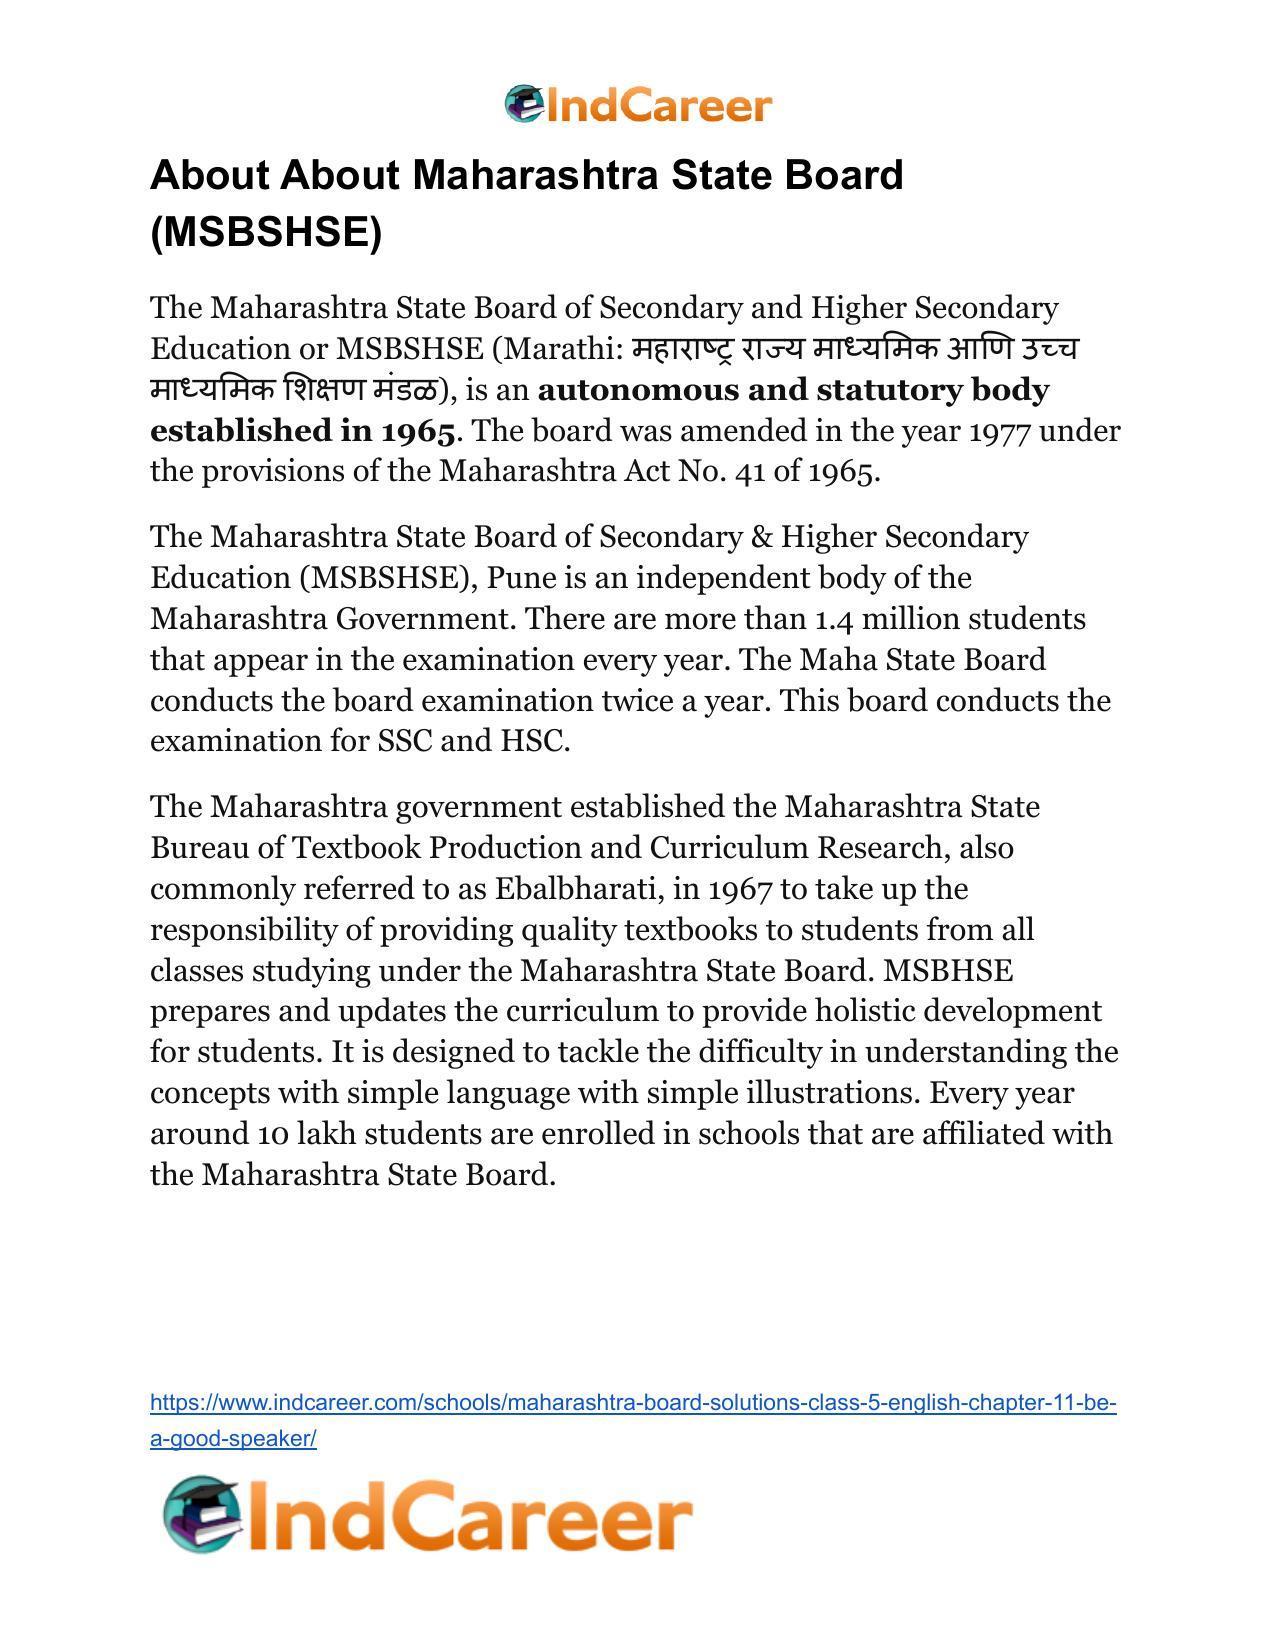 Maharashtra Board Solutions Class 5-English: Chapter 11- Be a Good Speaker - Page 10